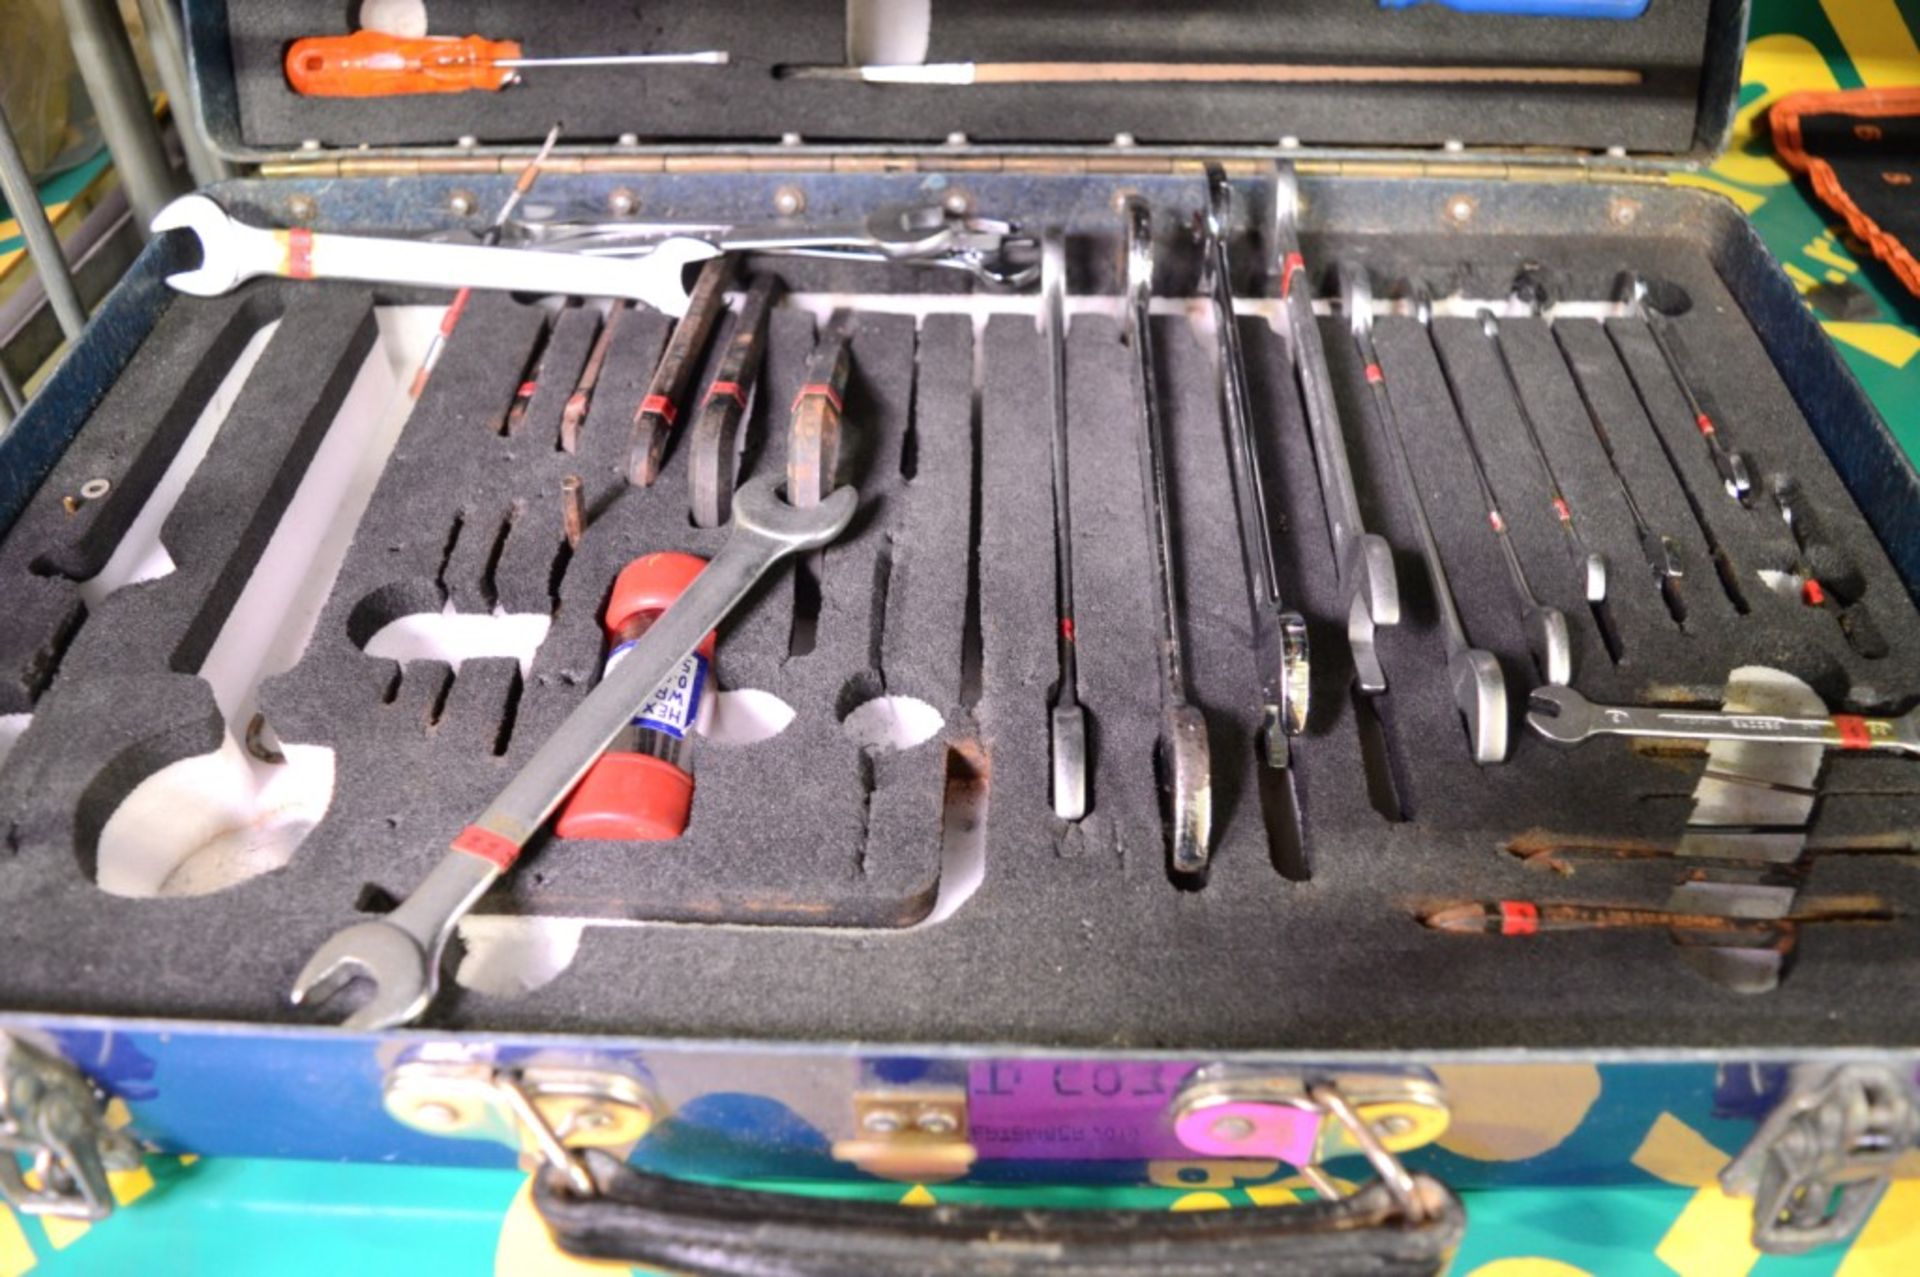 Tool Kit in GRP Carry Case. - Image 2 of 2